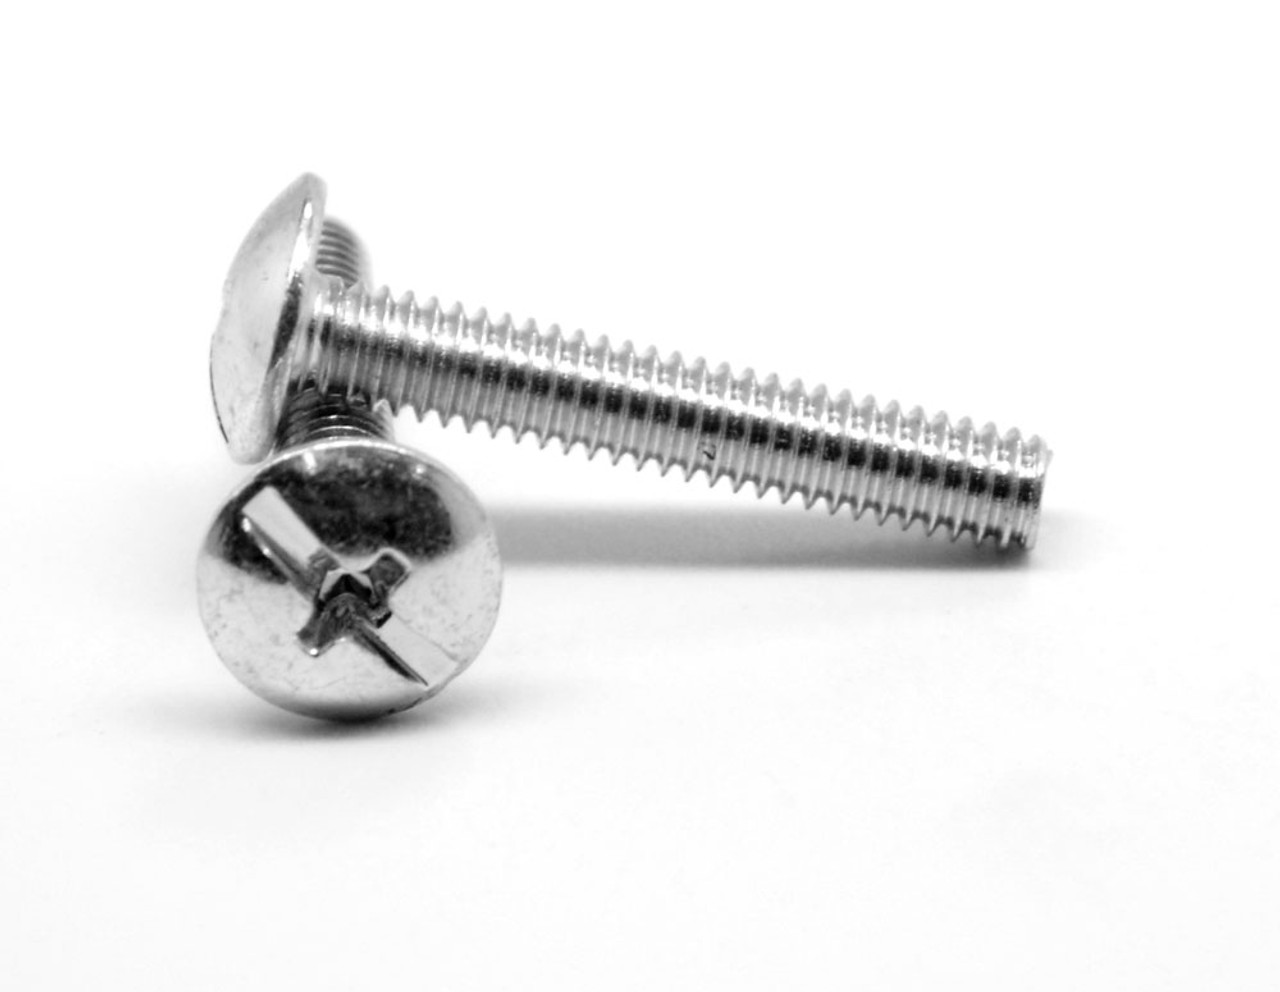 #10-24 x 1 1/2" (FT) Coarse Thread Machine Screw Combo (Phillips/Slotted) Truss Head Low Carbon Steel Zinc Plated